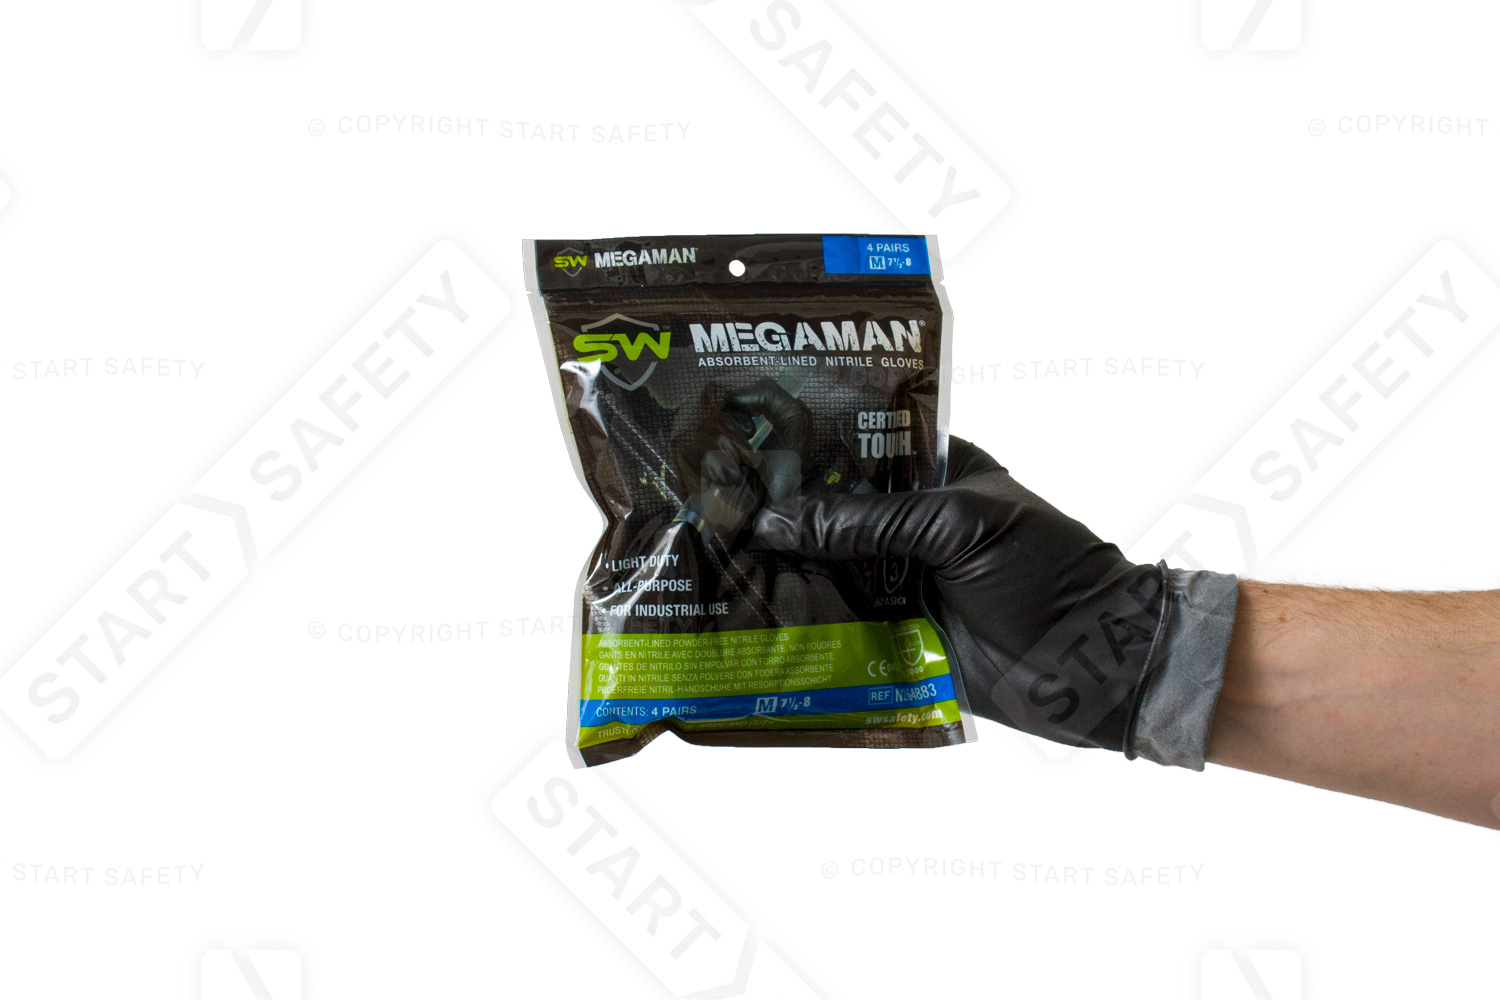 MegaMan glove small pack